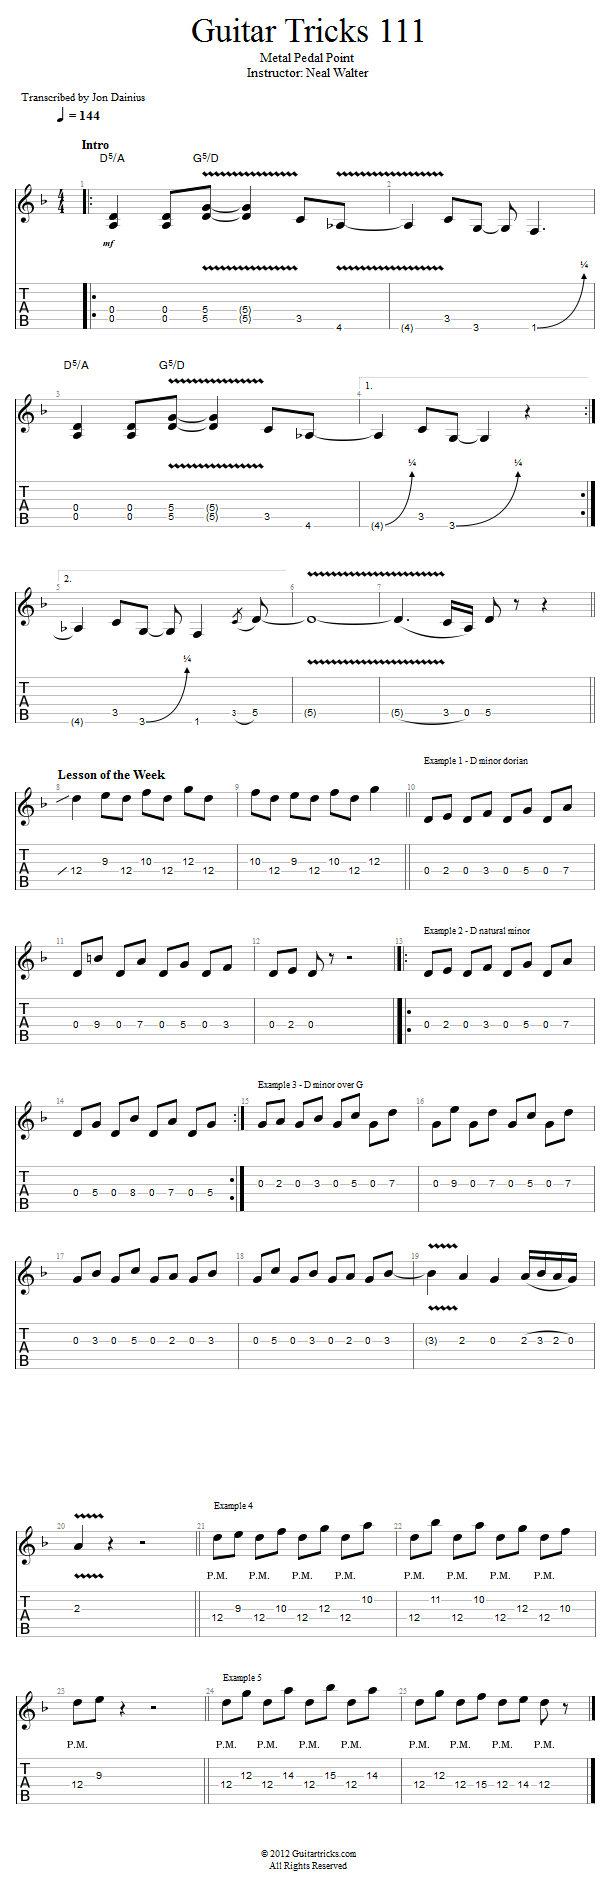 Guitar Tricks 111: Metal Pedal Point song notation